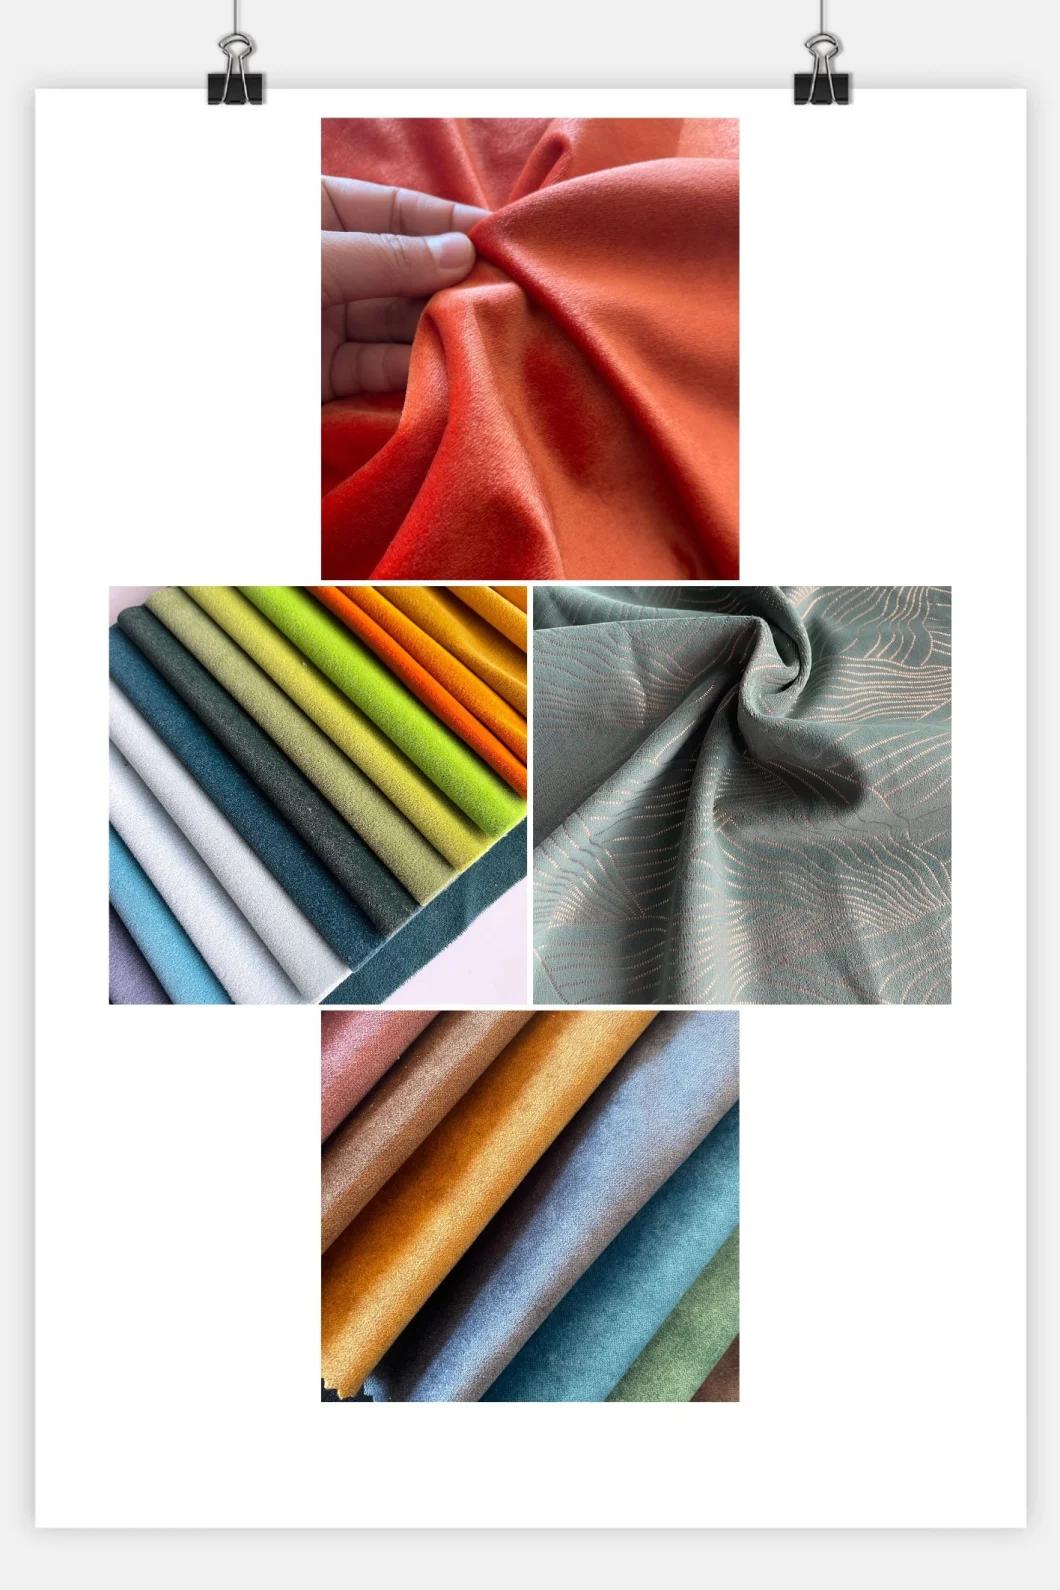 Ready Goods Polyester Woven Sofa Fabric for Couch Furniture Chair Cushion Uholstery Fabric Decorative Cloth (JX001.)